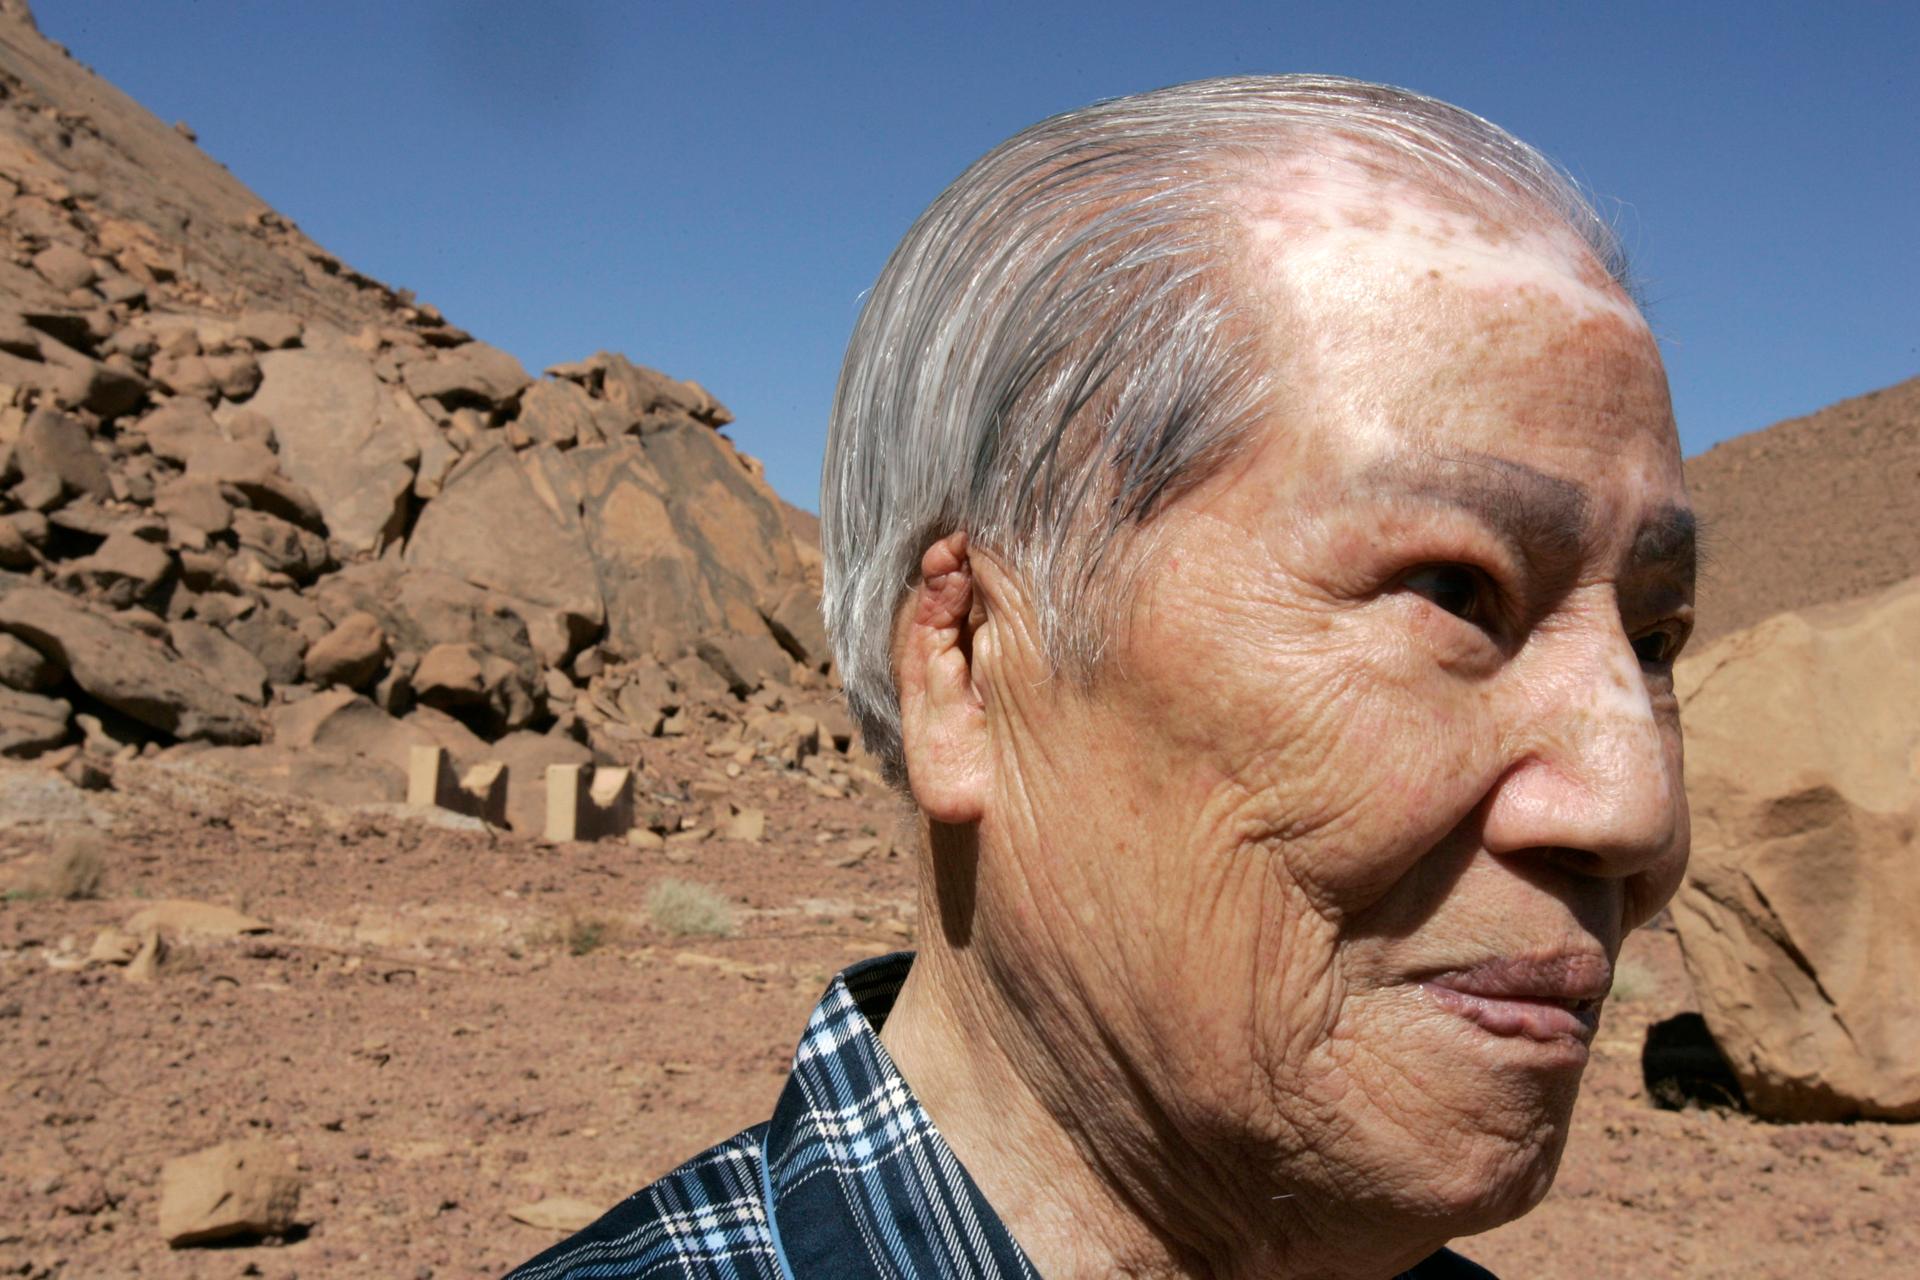 Hiroshima survivor Sunao Tsuboi is seen at a French nuclear test site in In-Ekker near Ain Meguel, February 16, 2007. 